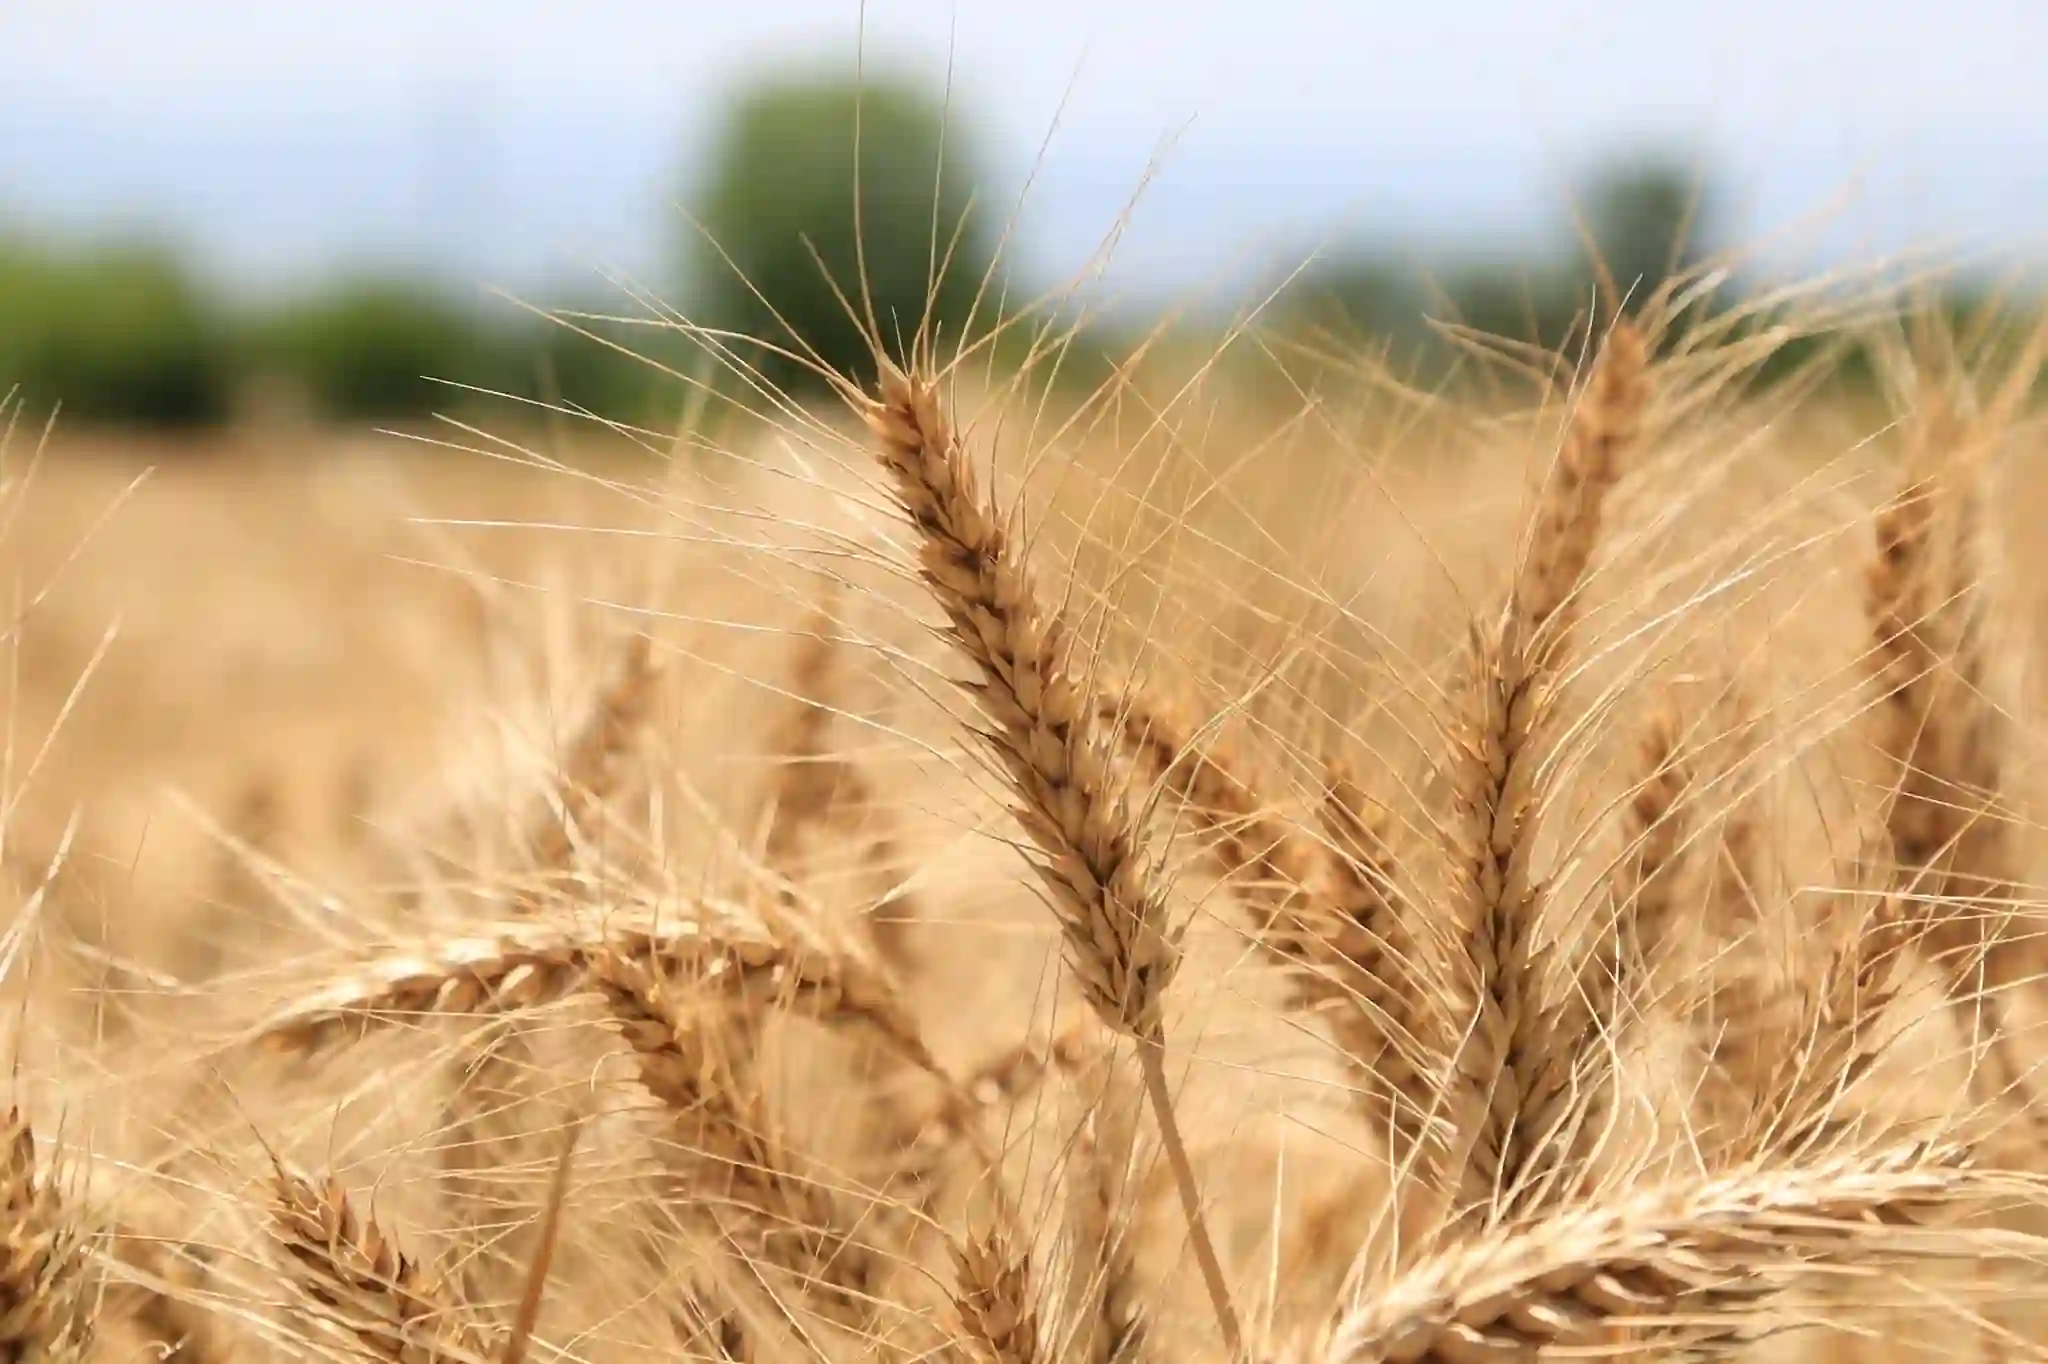 Marneuli municipality hosts Wheat selection demonstration open door day